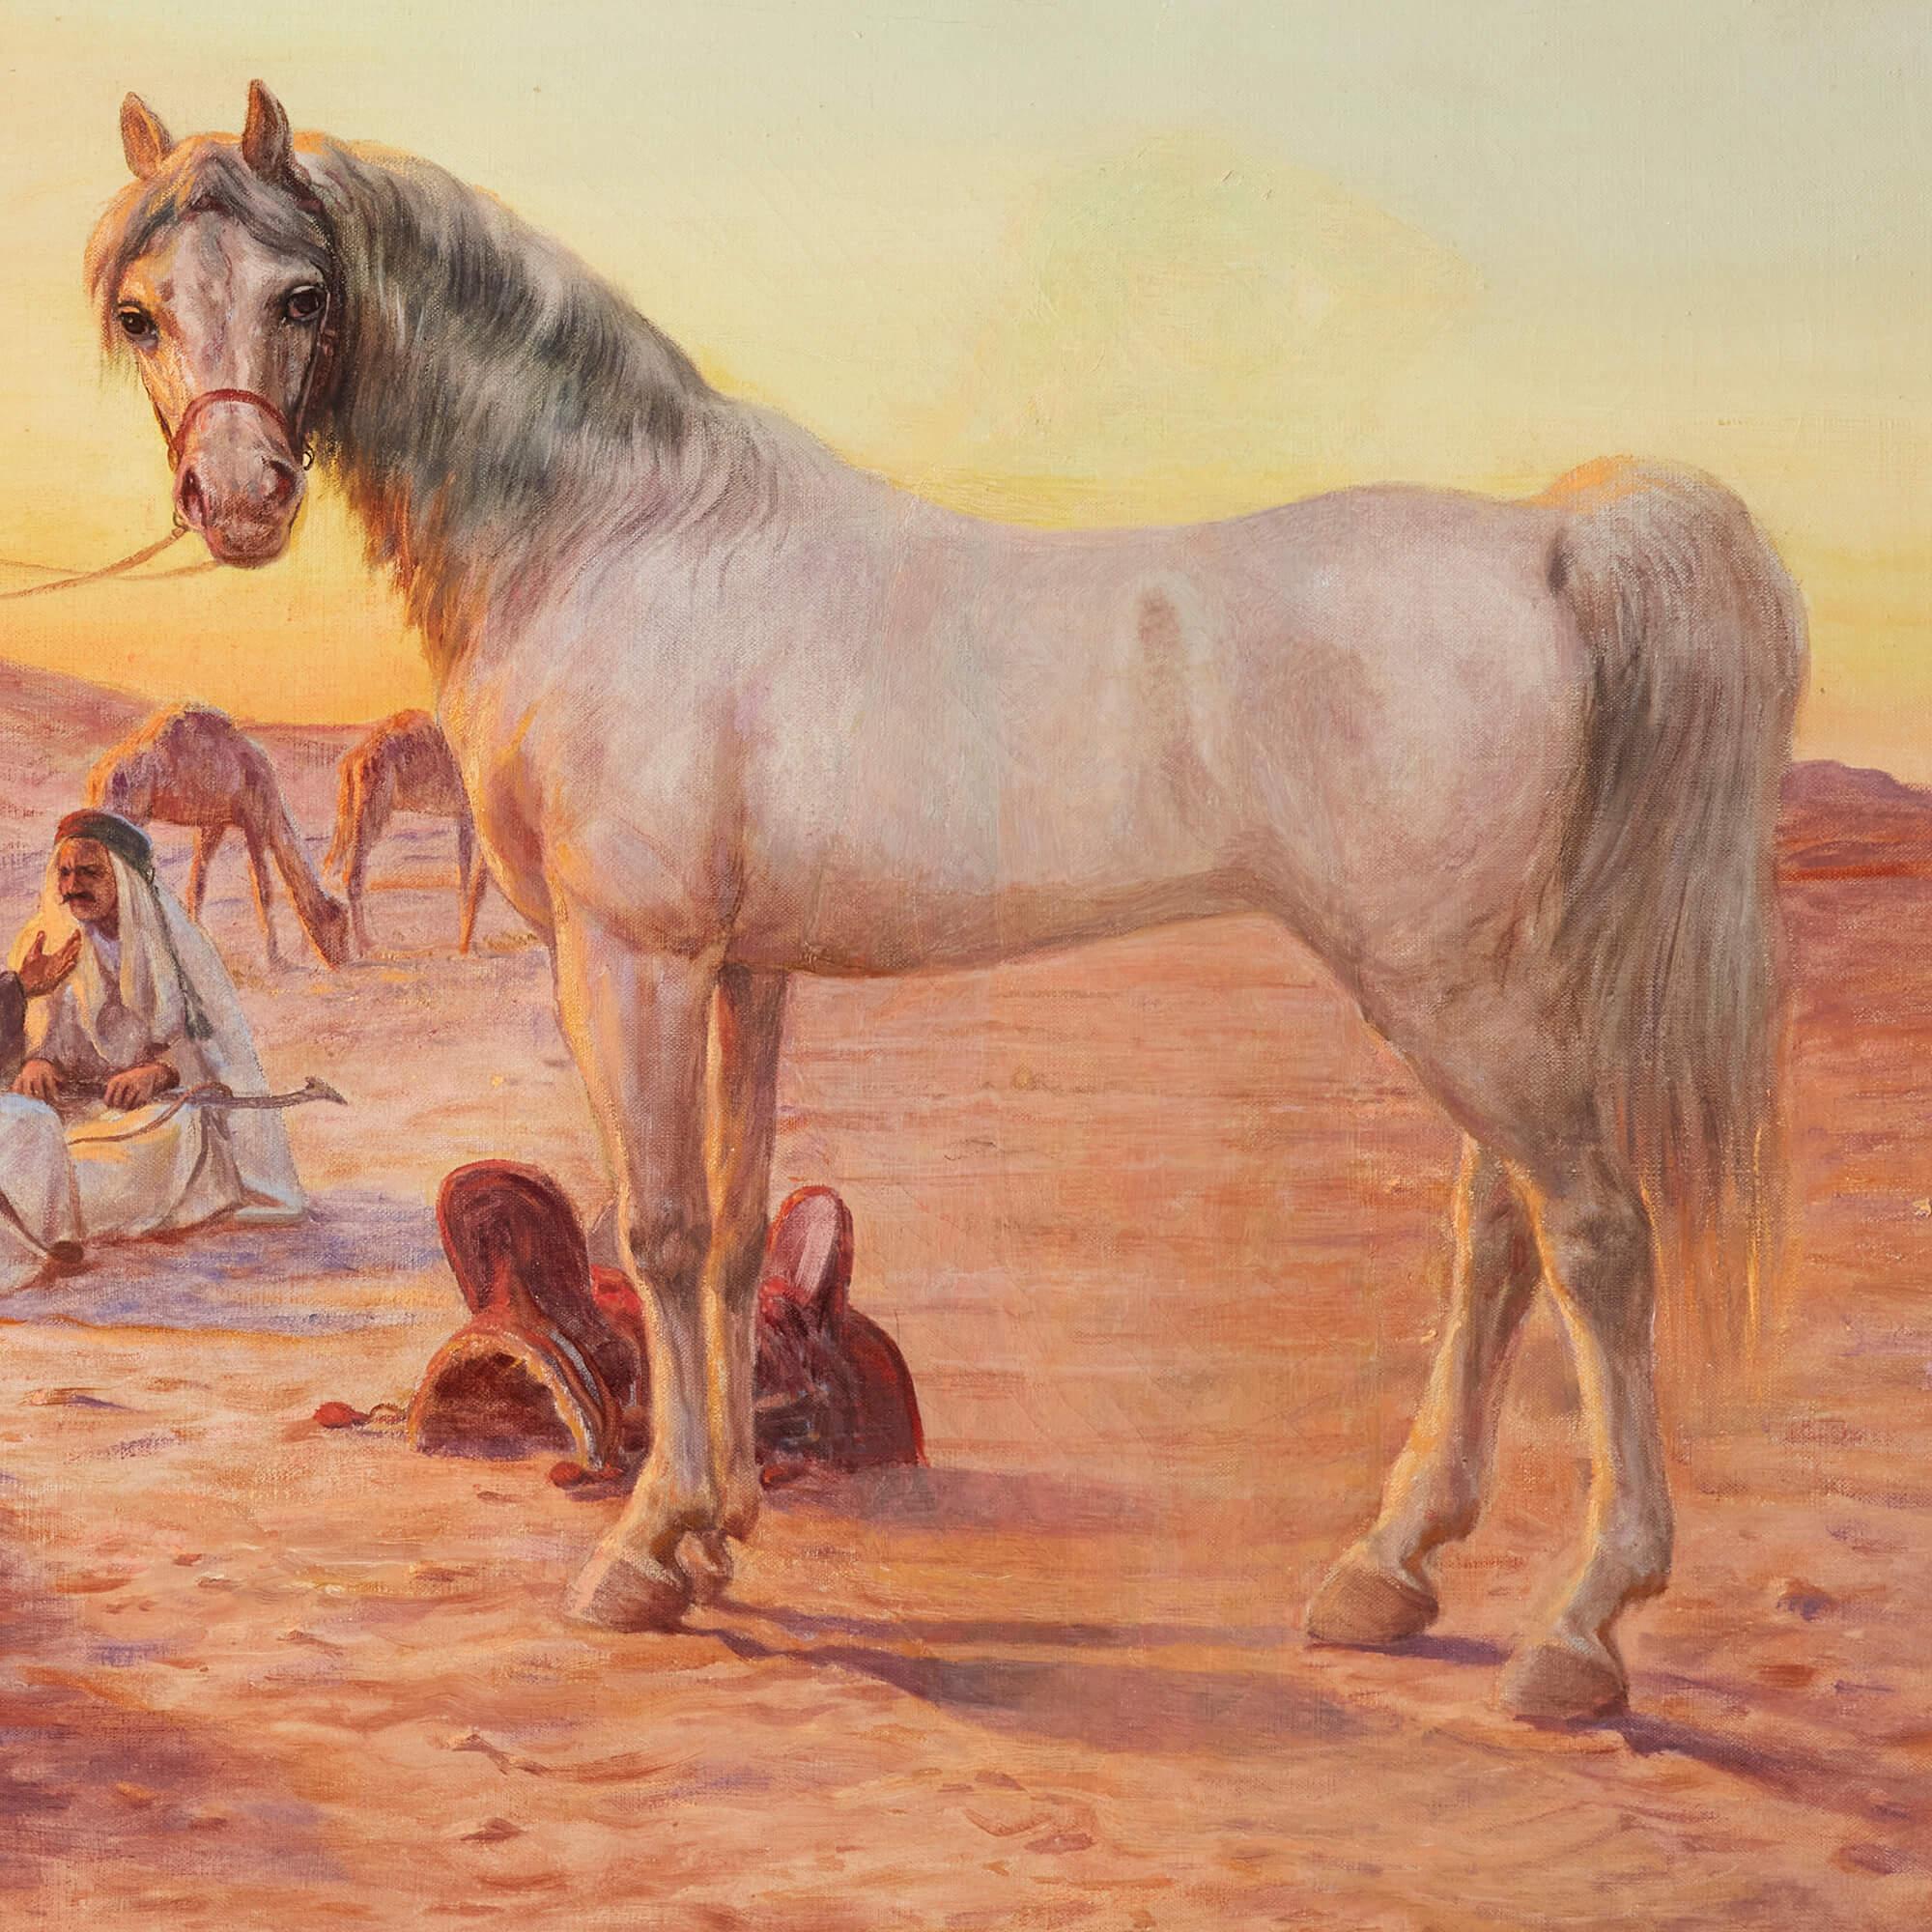 Orientalist Oil Painting Depicting the Trade of a Horse by Pilny For Sale 1